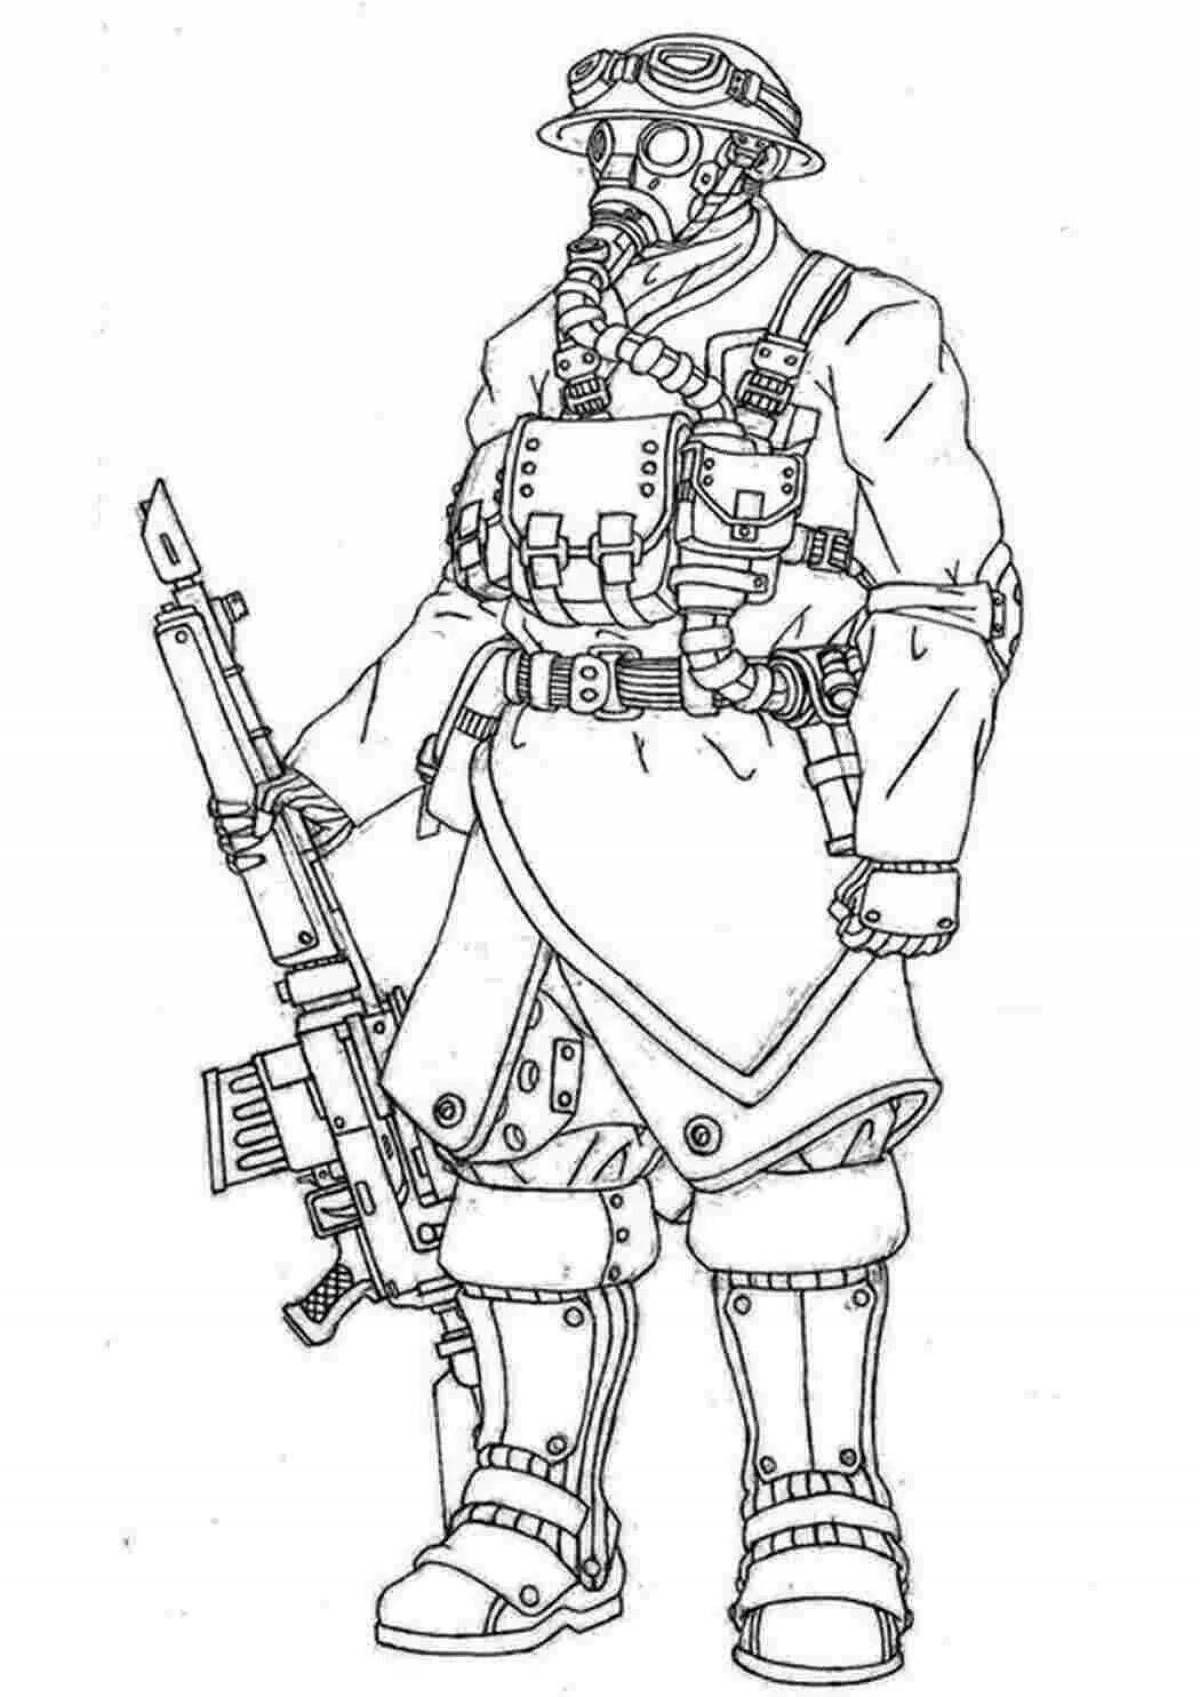 Modern soldier creative coloring book for kids